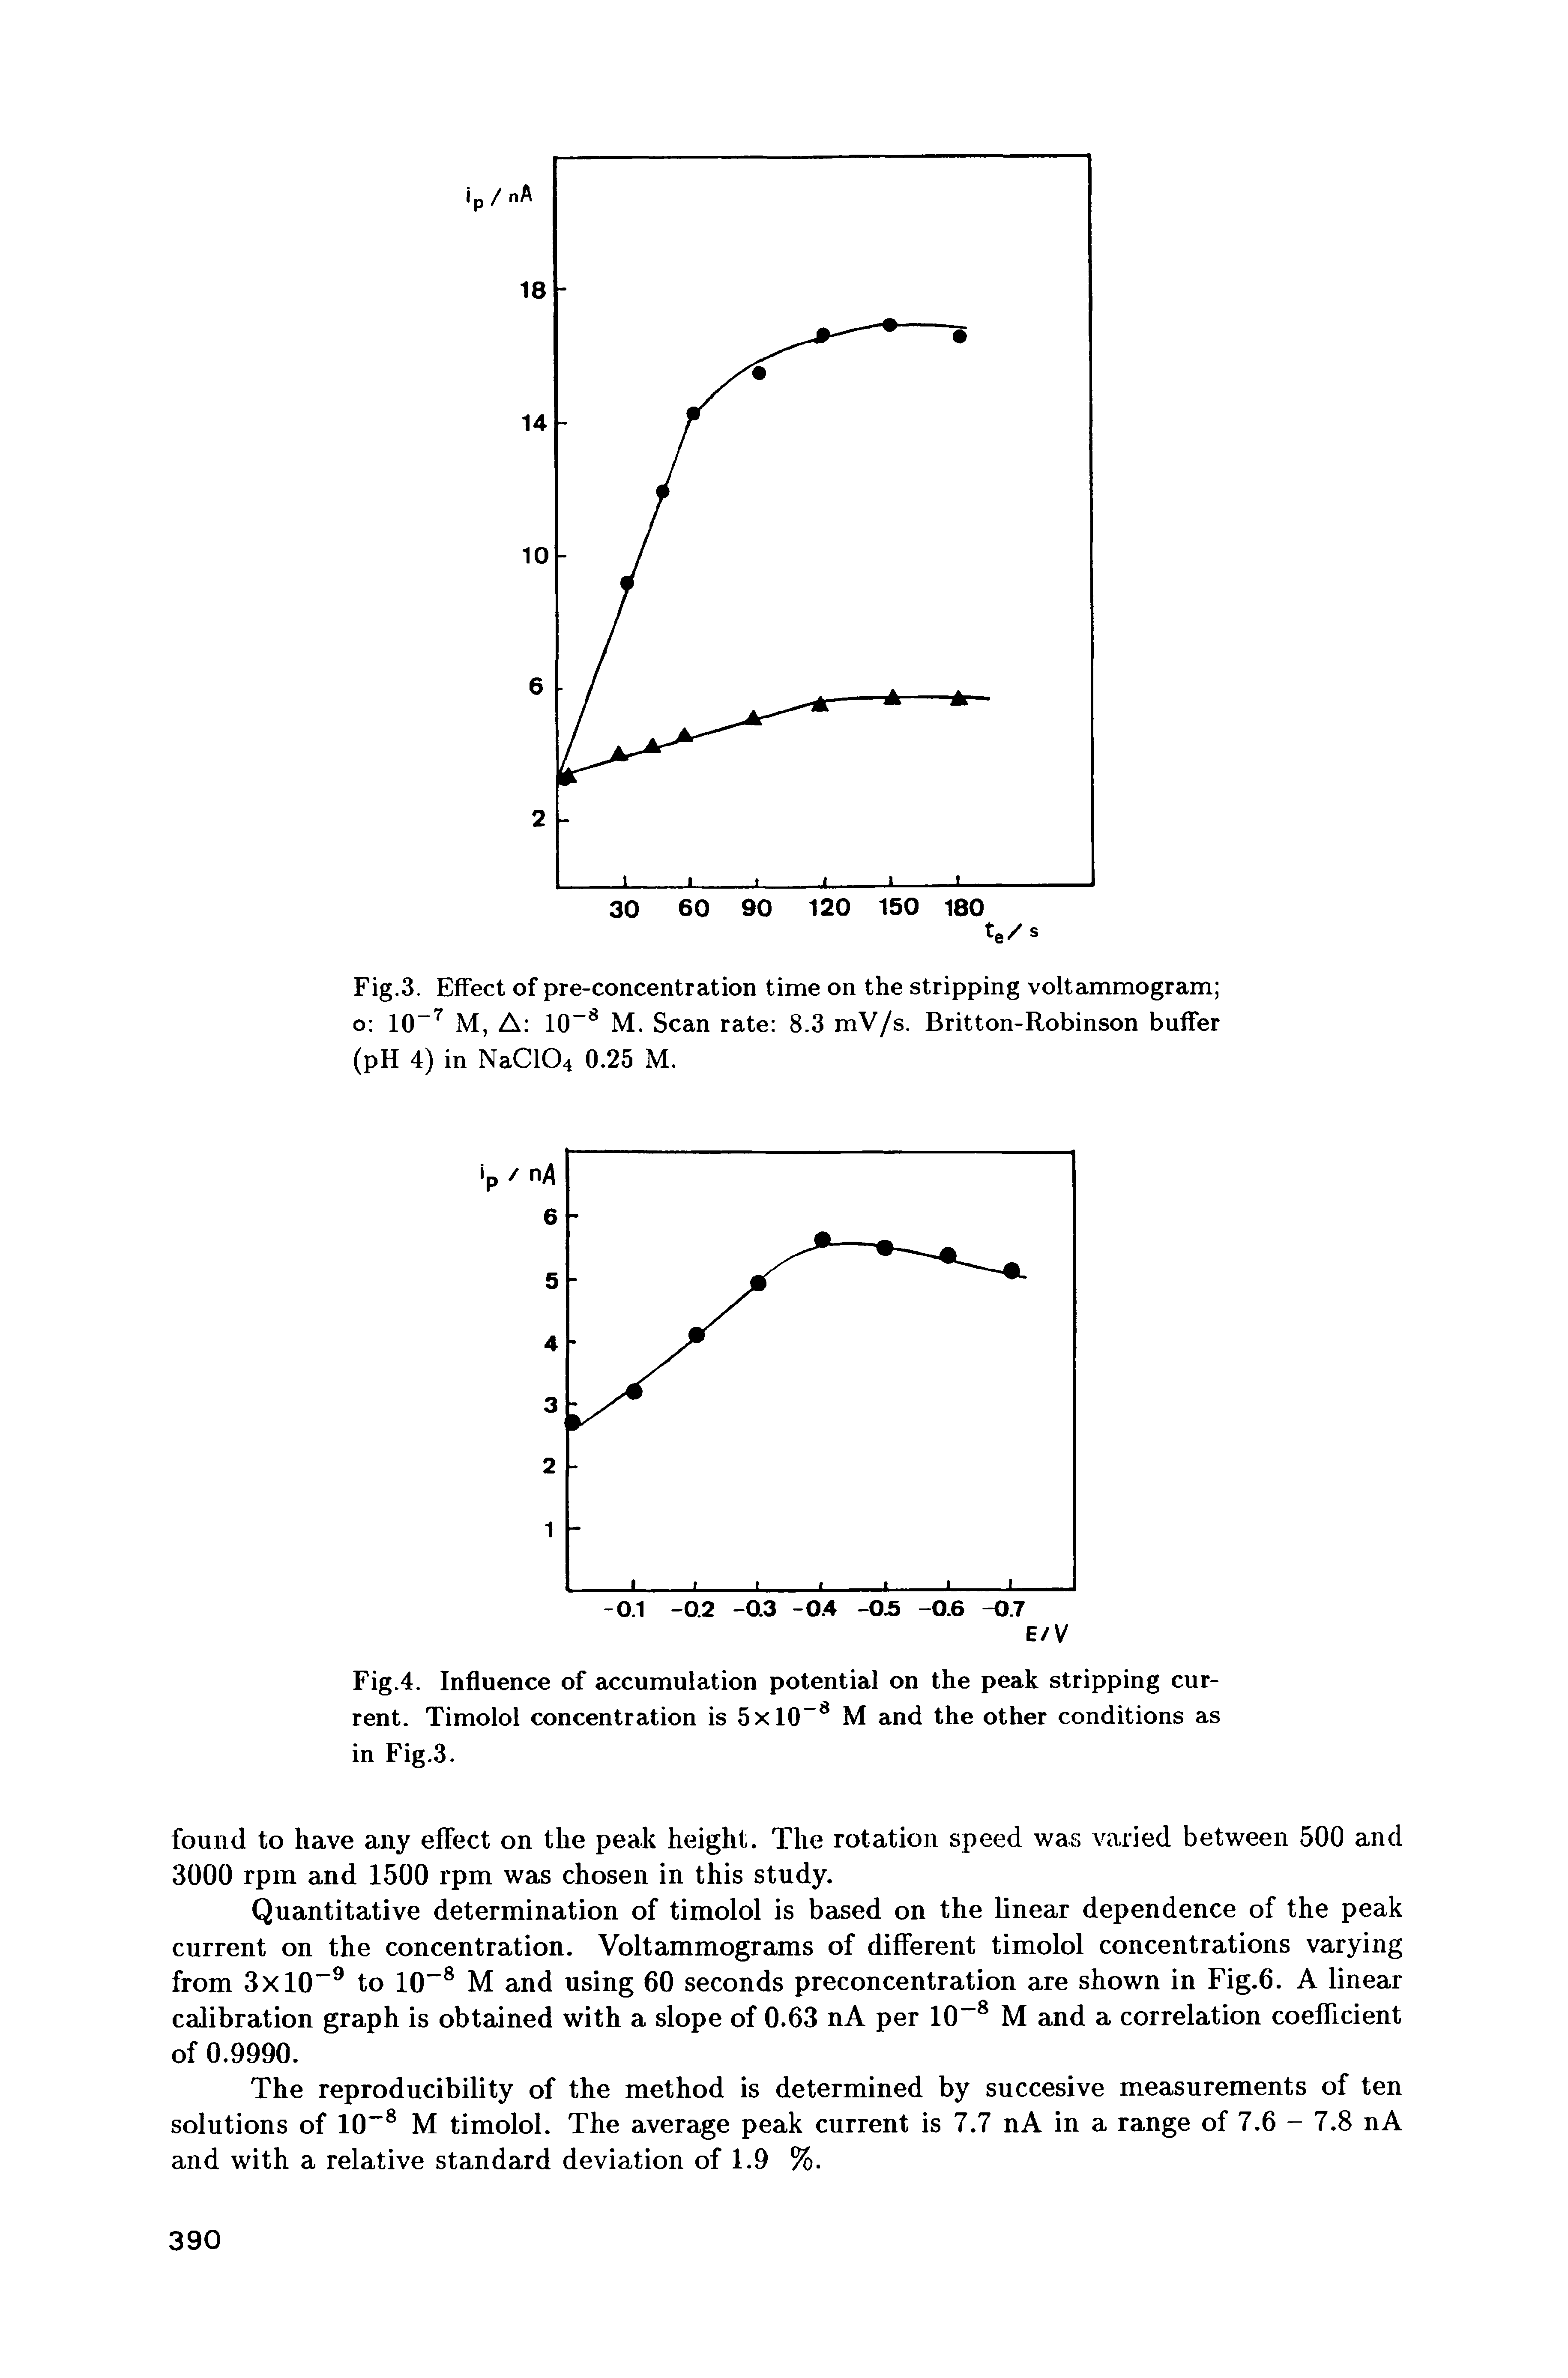 Fig.4. Influence of accumulation potential on the peak stripping current. Timolol concentration is 5x10 M and the other conditions as in Fig.3.